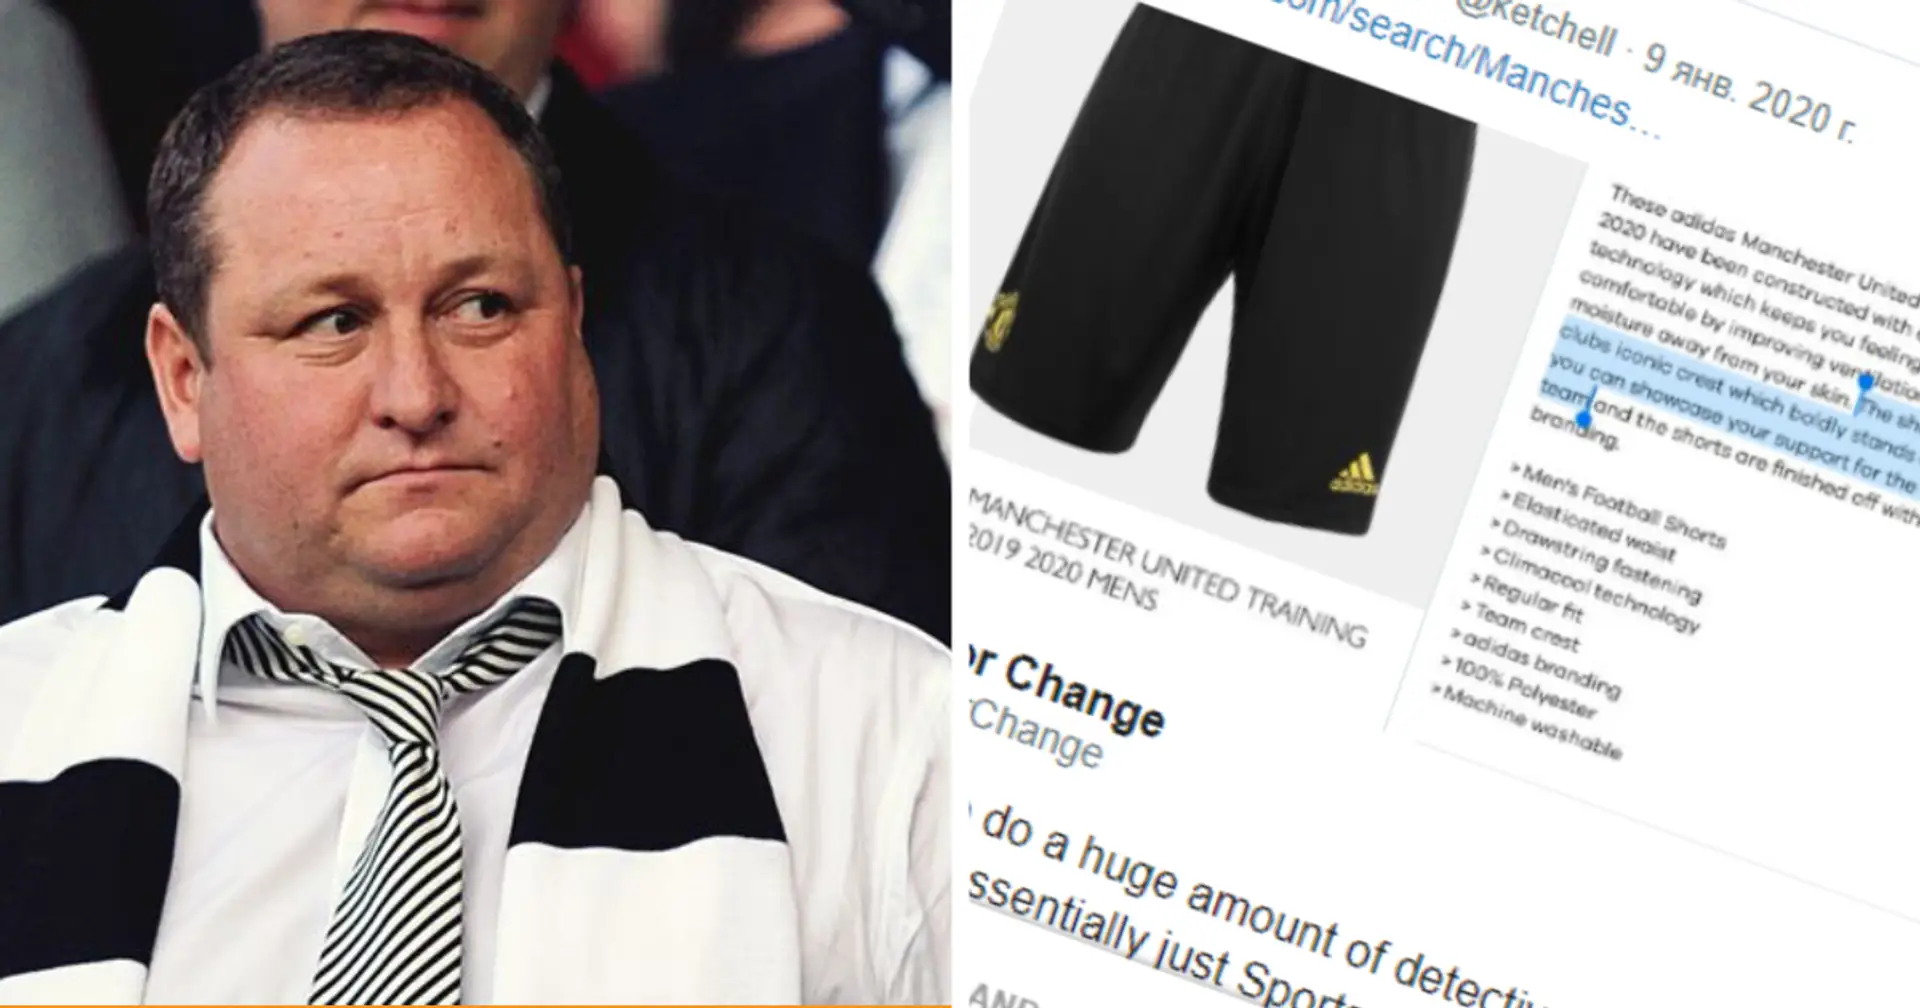 Man United merchandise bizarrely found on Newcastle's official club shop